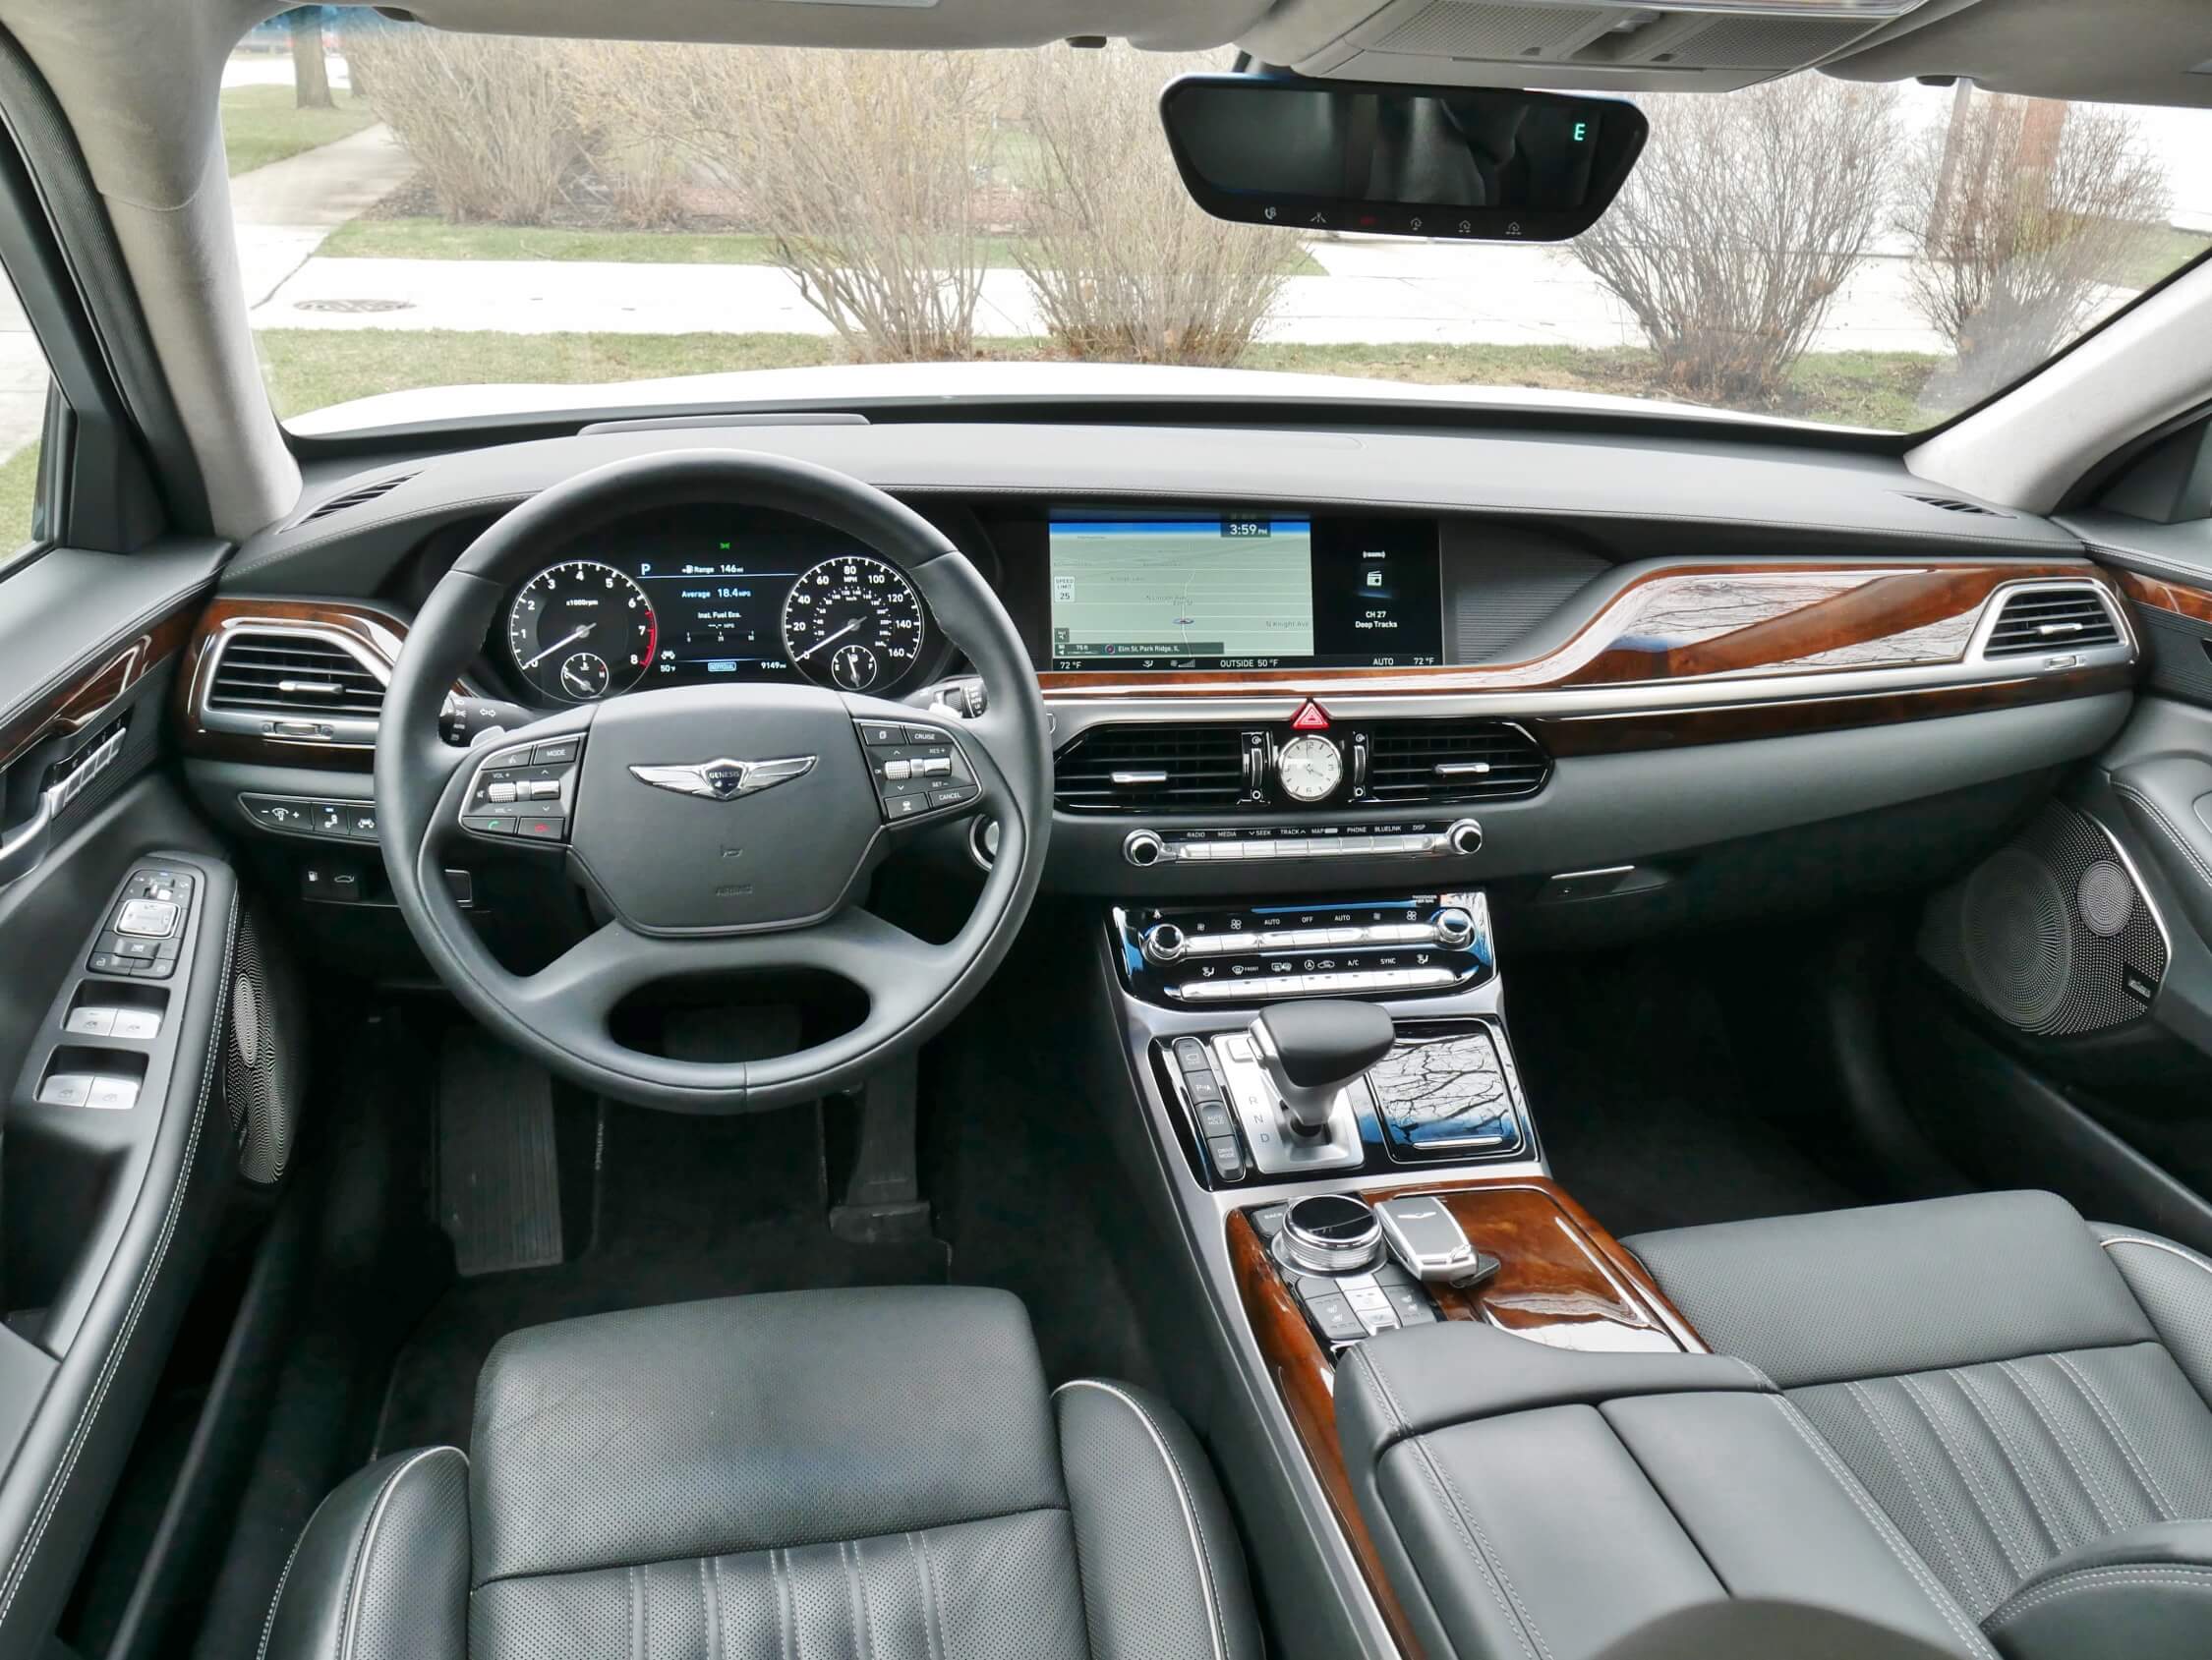 2018 Genesis G90 3.3T AWD: Cockpit is a lesson in minimal control and little expense spared in finish materials: Brushed aluminum switches, wood veneer inlays, satin finish leathers, alcantara suede pillar & headliners